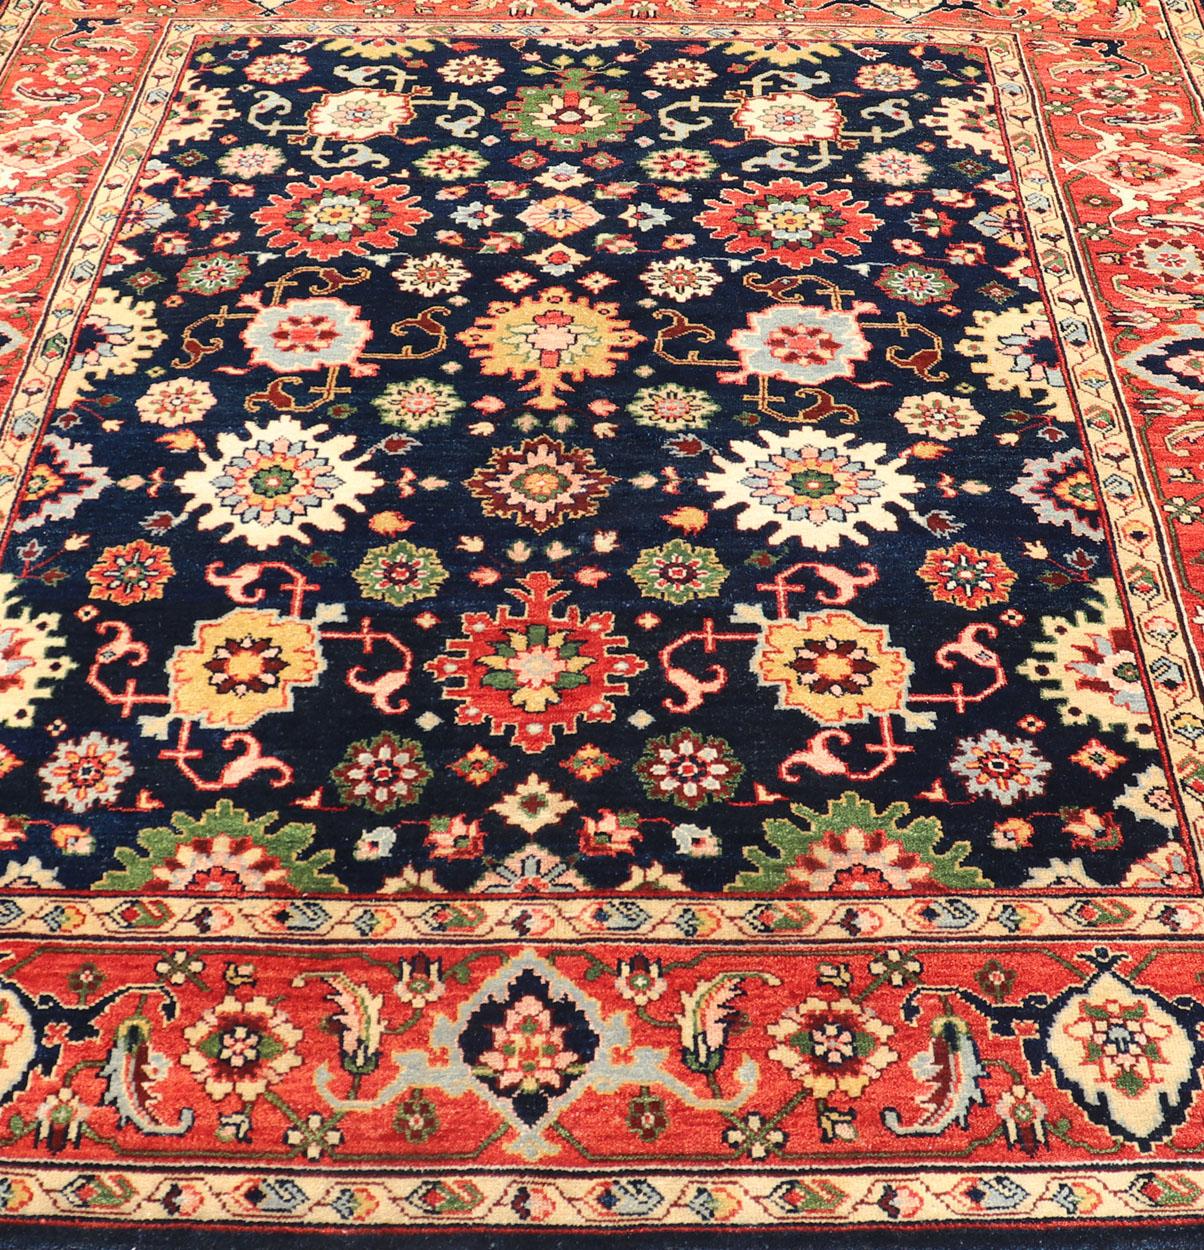 Keivan Woven Arts Sultanabad-Mahal Design in All-Over Floral Handgeknüpfter Teppich im Angebot 9